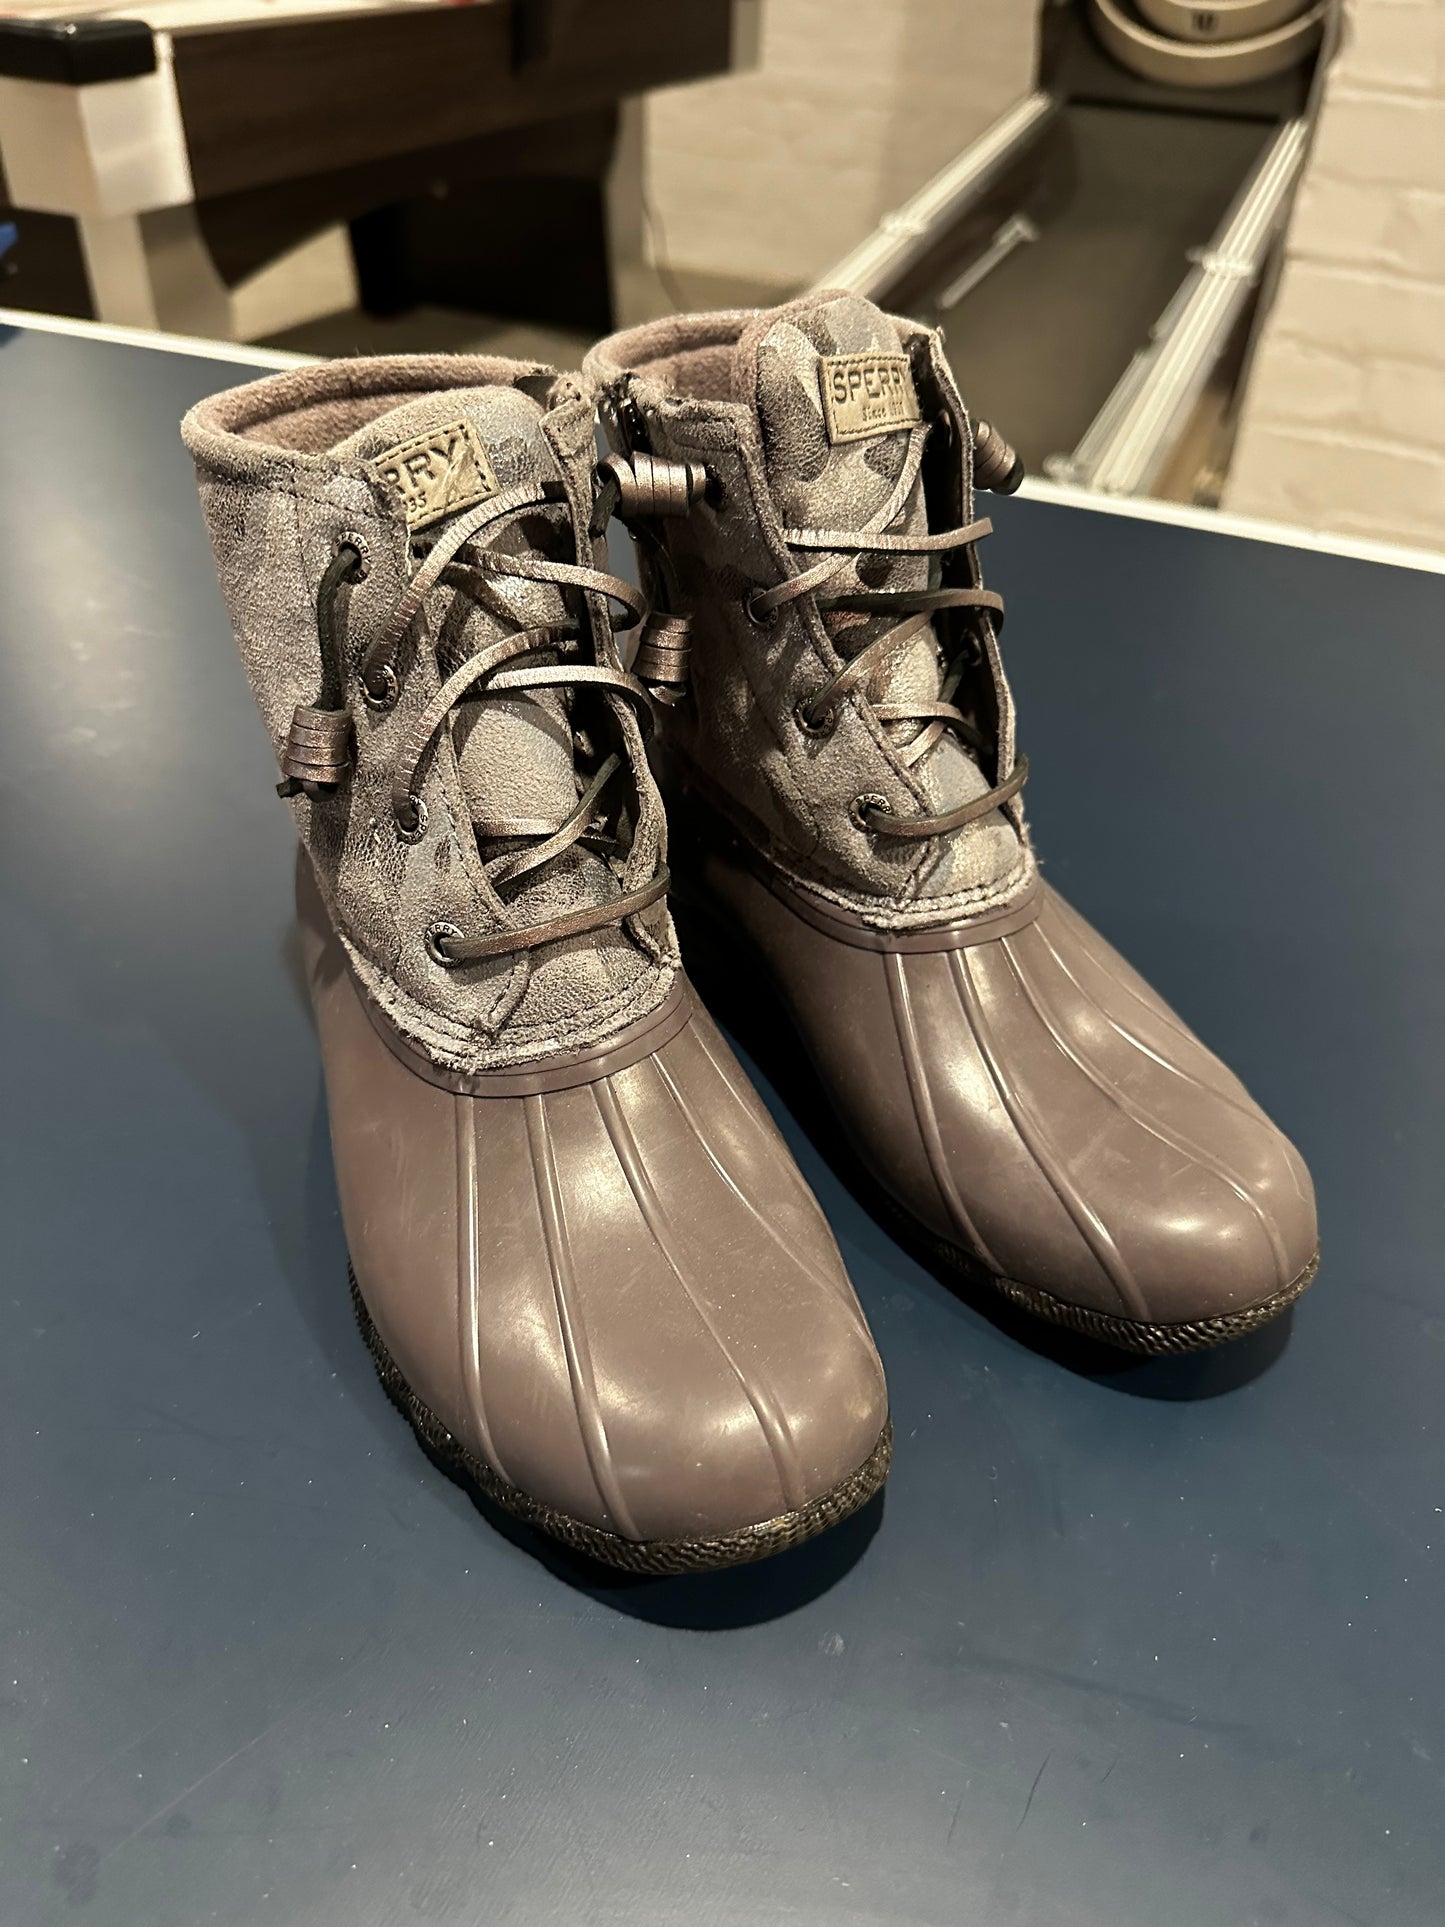 Sperry Womens's size 6 Grey Camo Boot.